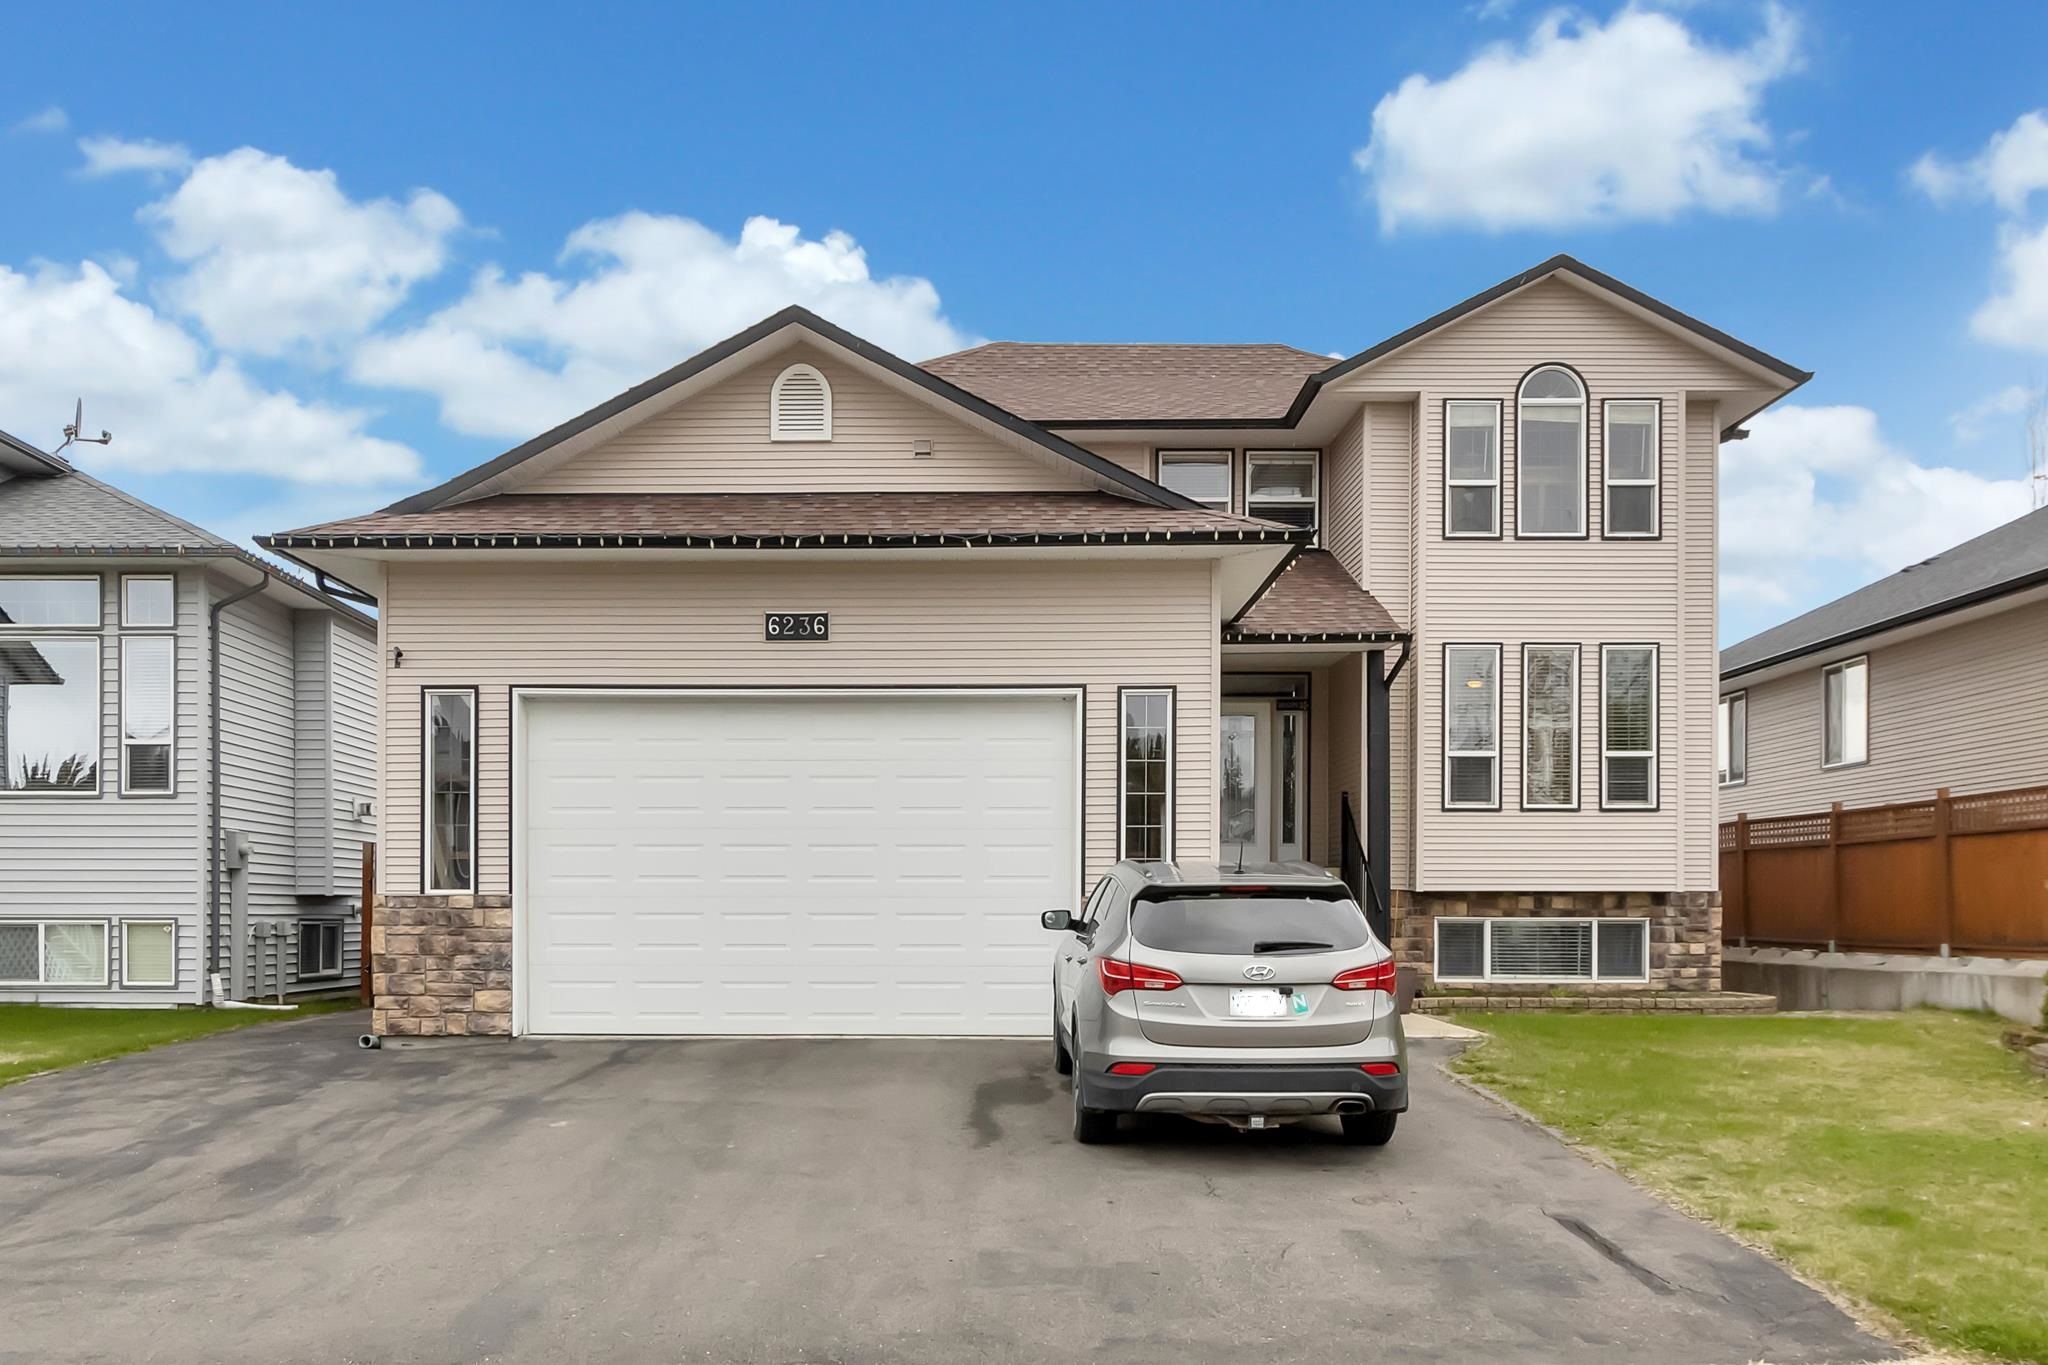 Open House. Open House on Saturday, June 18, 2022 12:00PM - 2:00PM
Come join France and check out this amazing home with a hot new price! Lots of room here for your family.